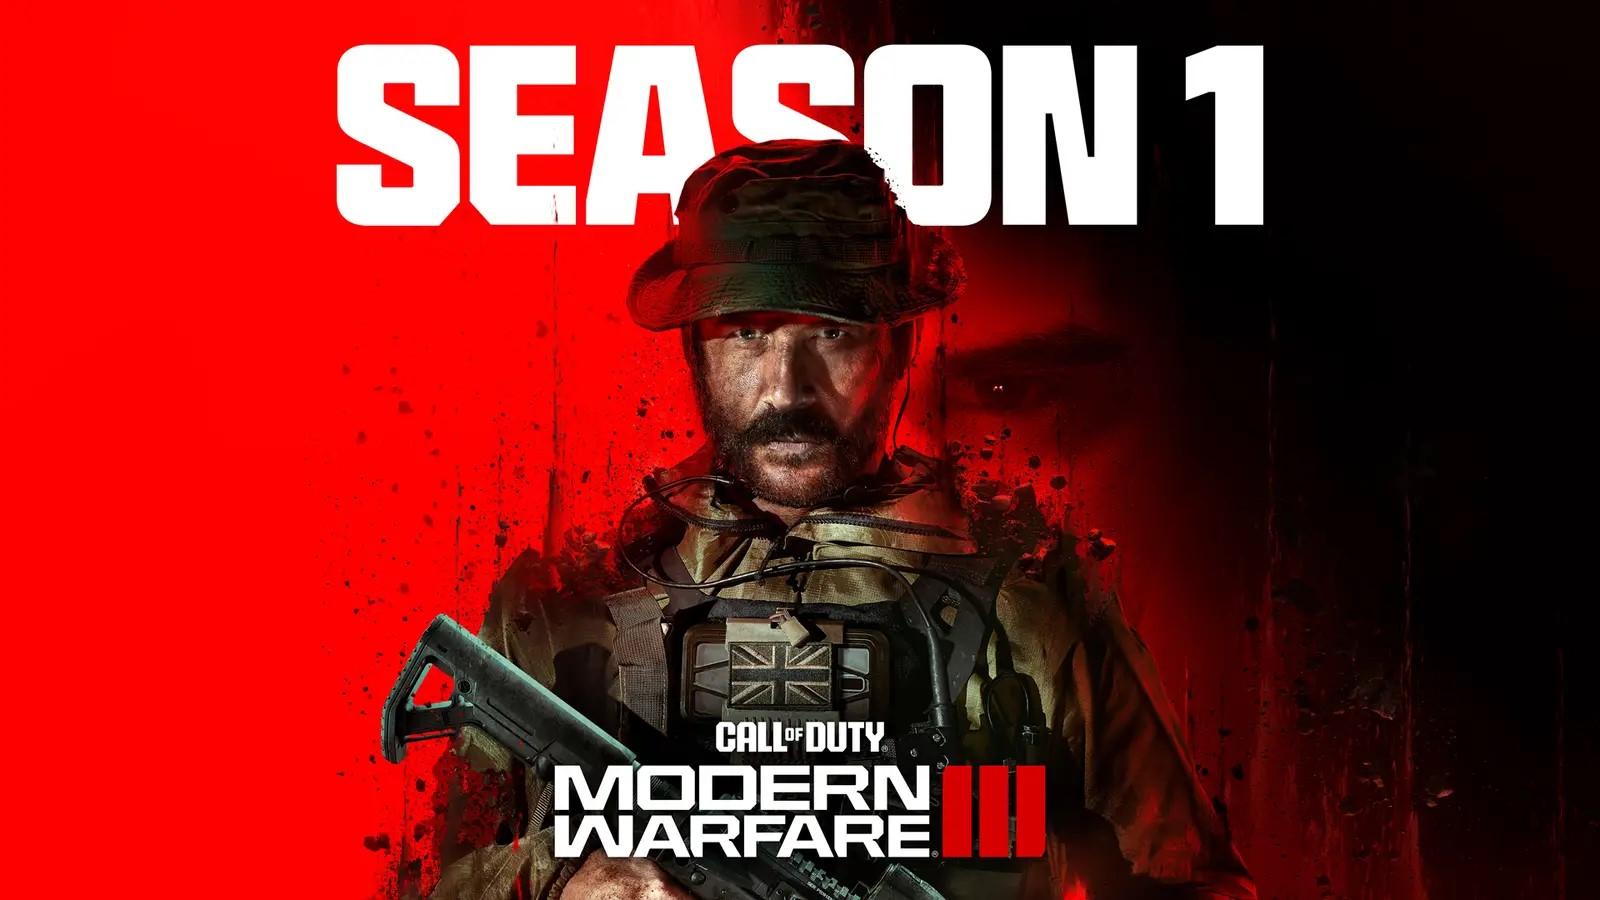 MW3 Captain Price looking at camera to advertise Season 1